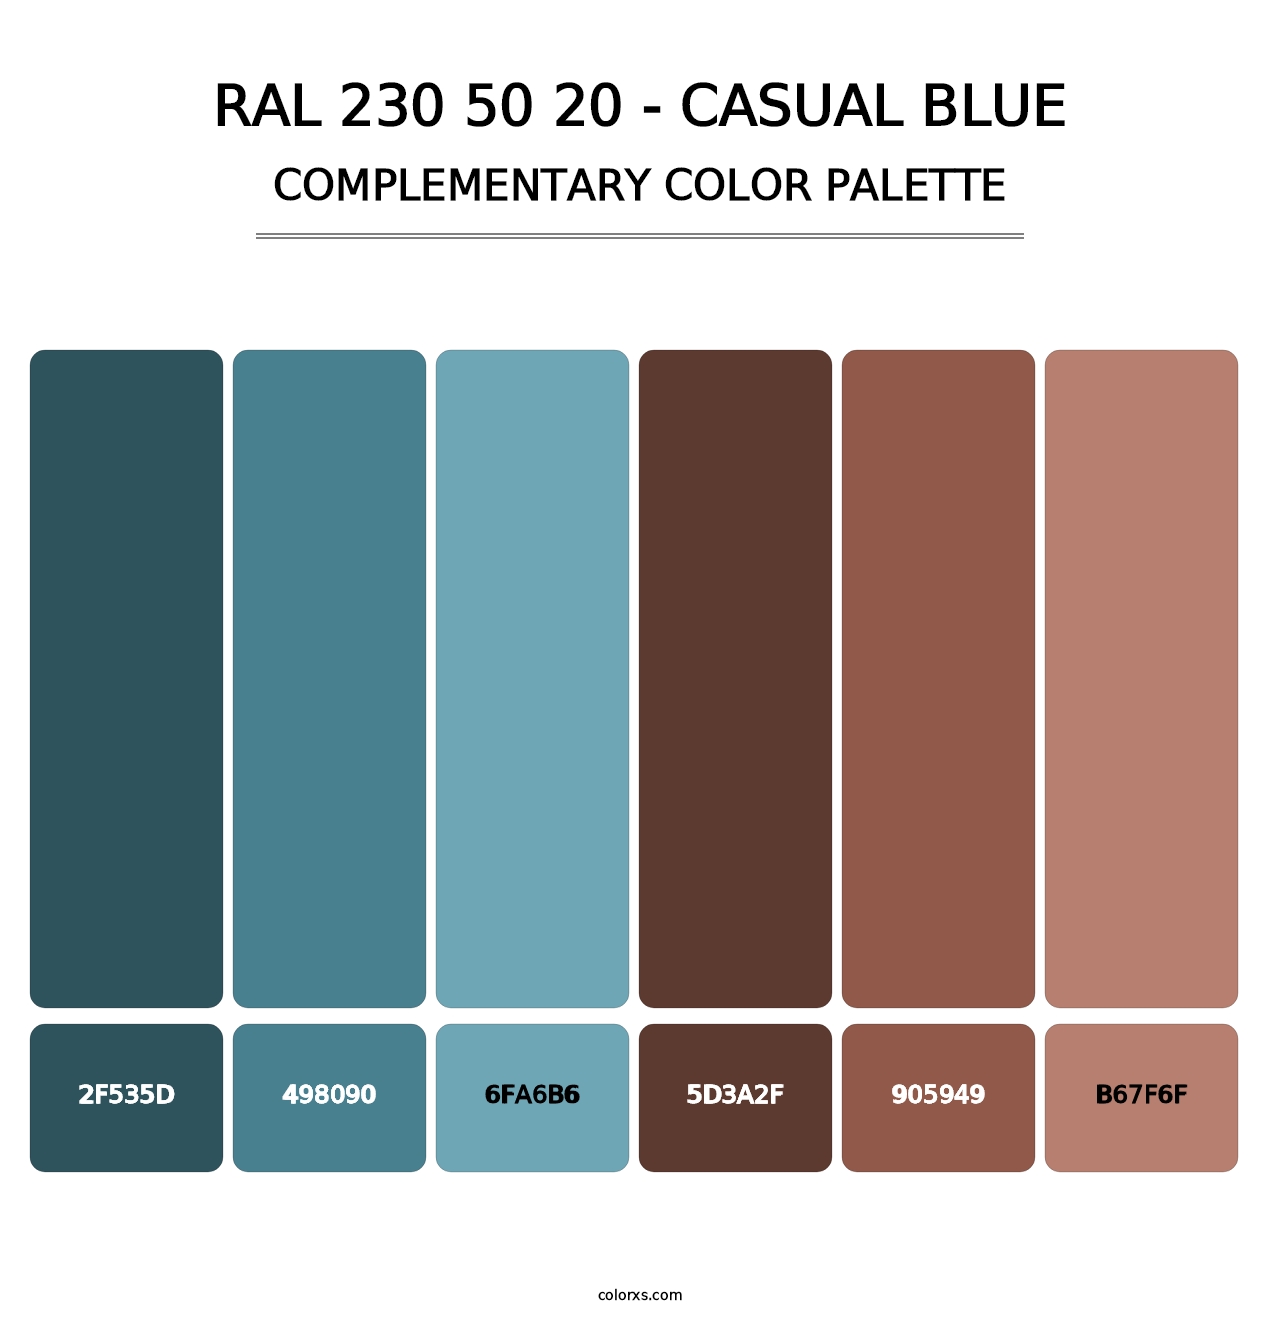 RAL 230 50 20 - Casual Blue - Complementary Color Palette